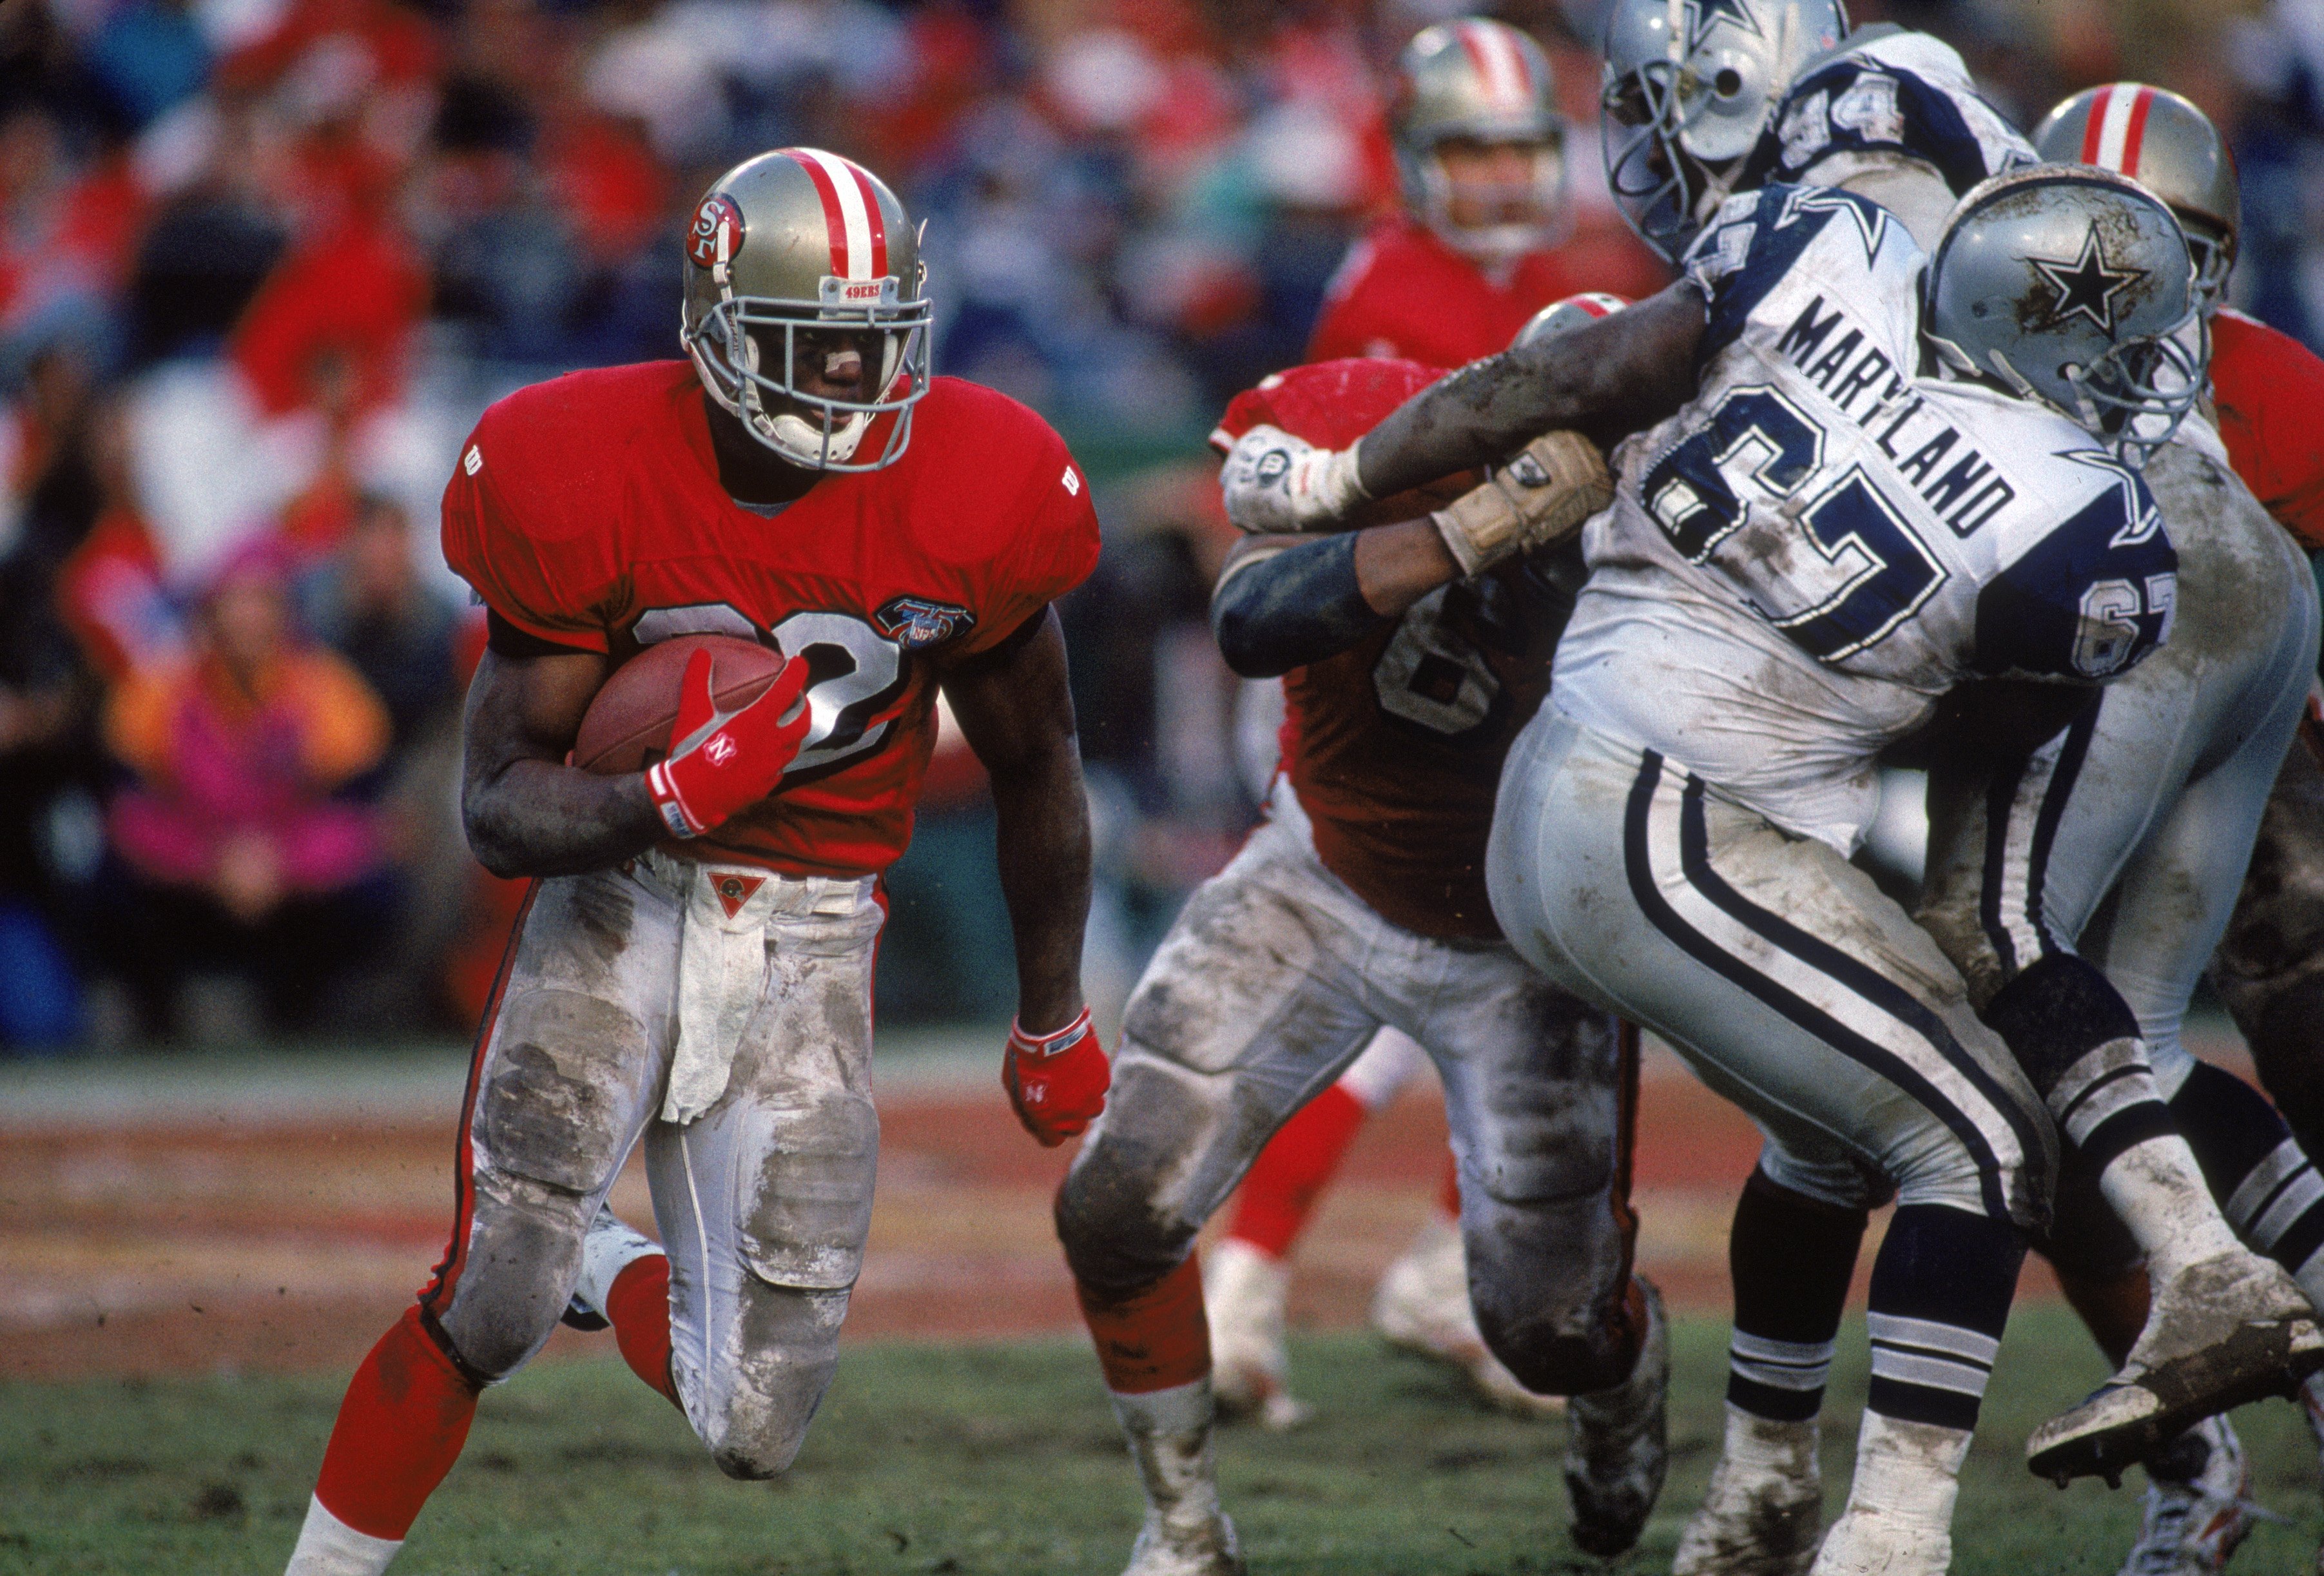 SAN FRANCISCO - JANUARY 15:  Running back Ricky Watters #32 of the San Francisco 49ers runs with the ball during the 1994 NFC Championship game against the Dallas Cowboys at Candlestick Park on January 15, 1995 in San Francisco, California.  The 49ers won